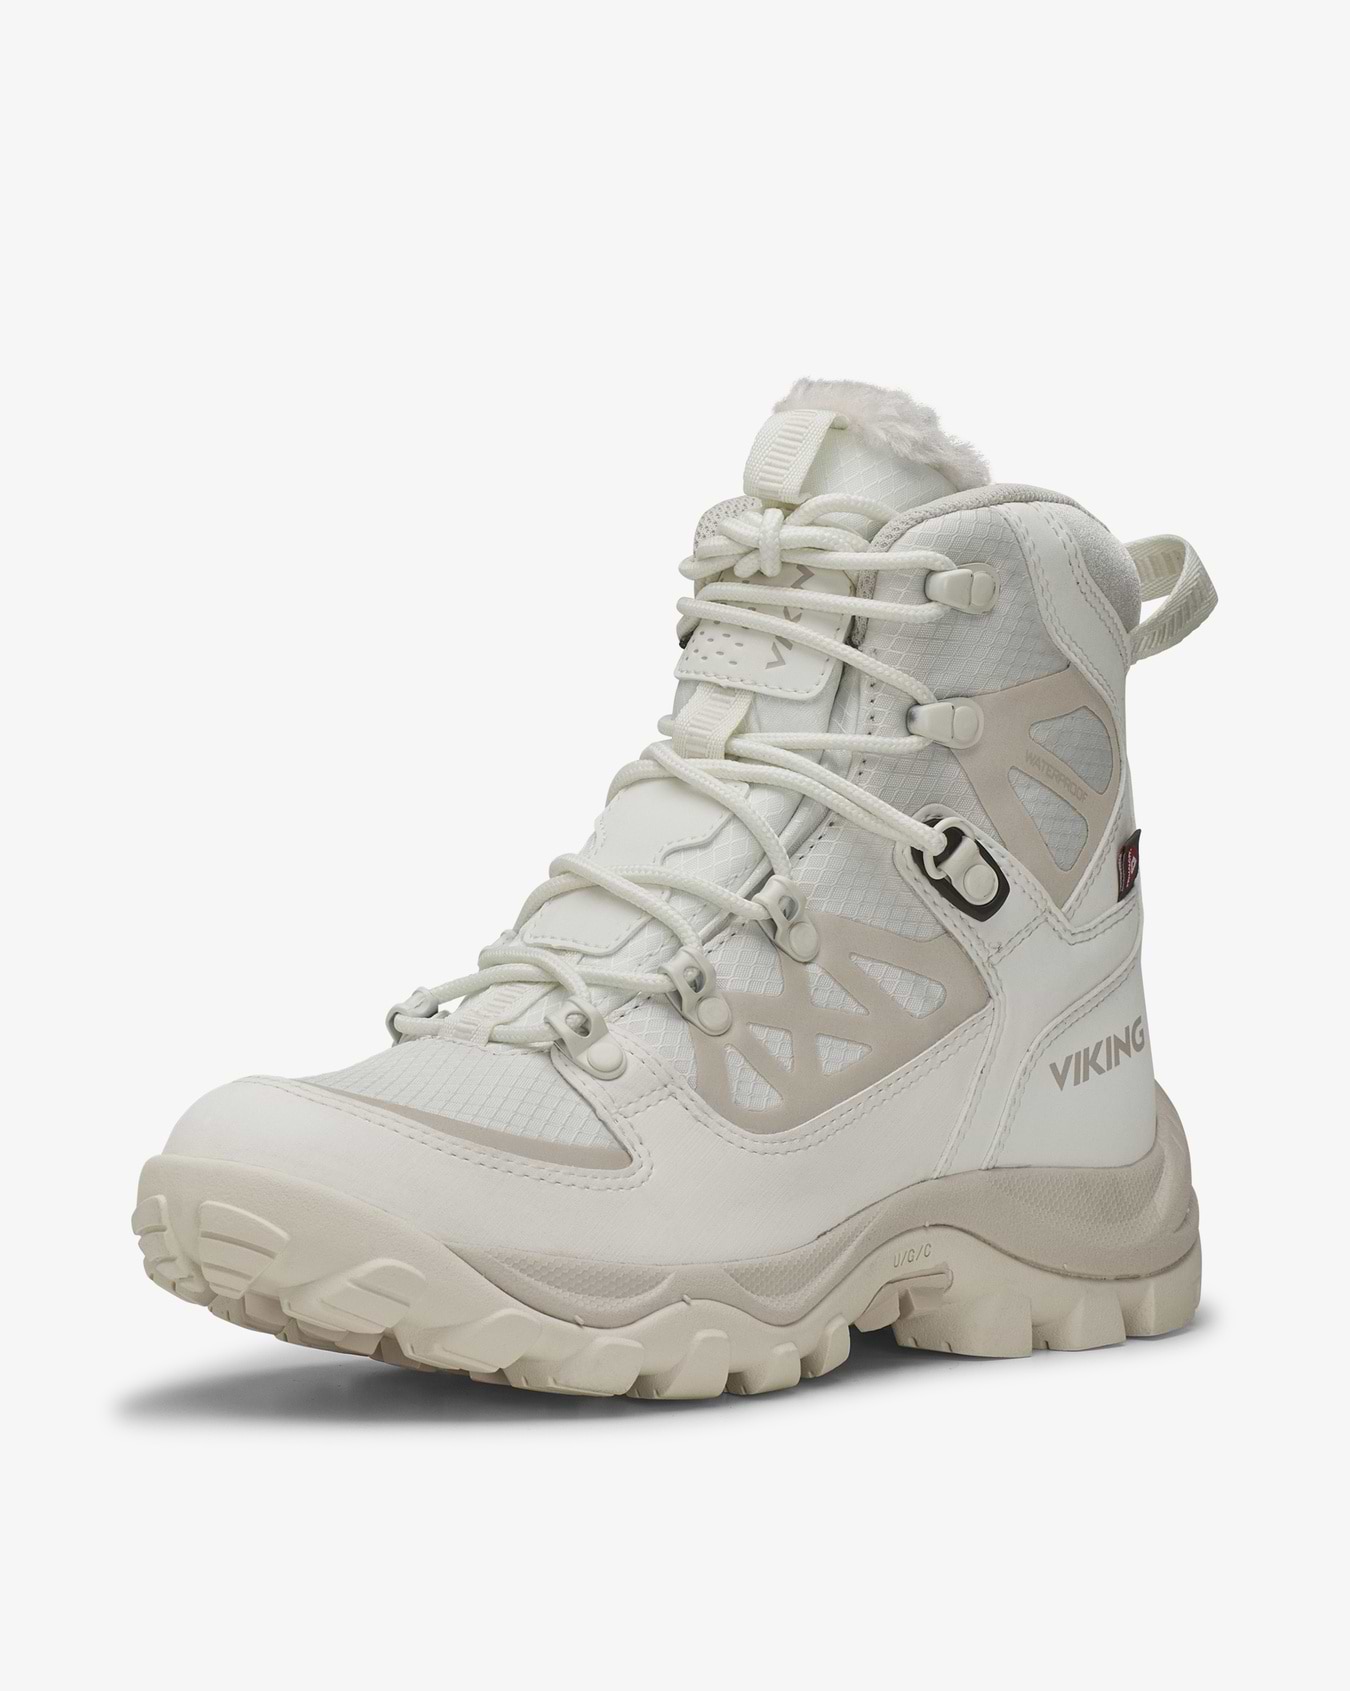 Constrictor High WP W Cream Hiking